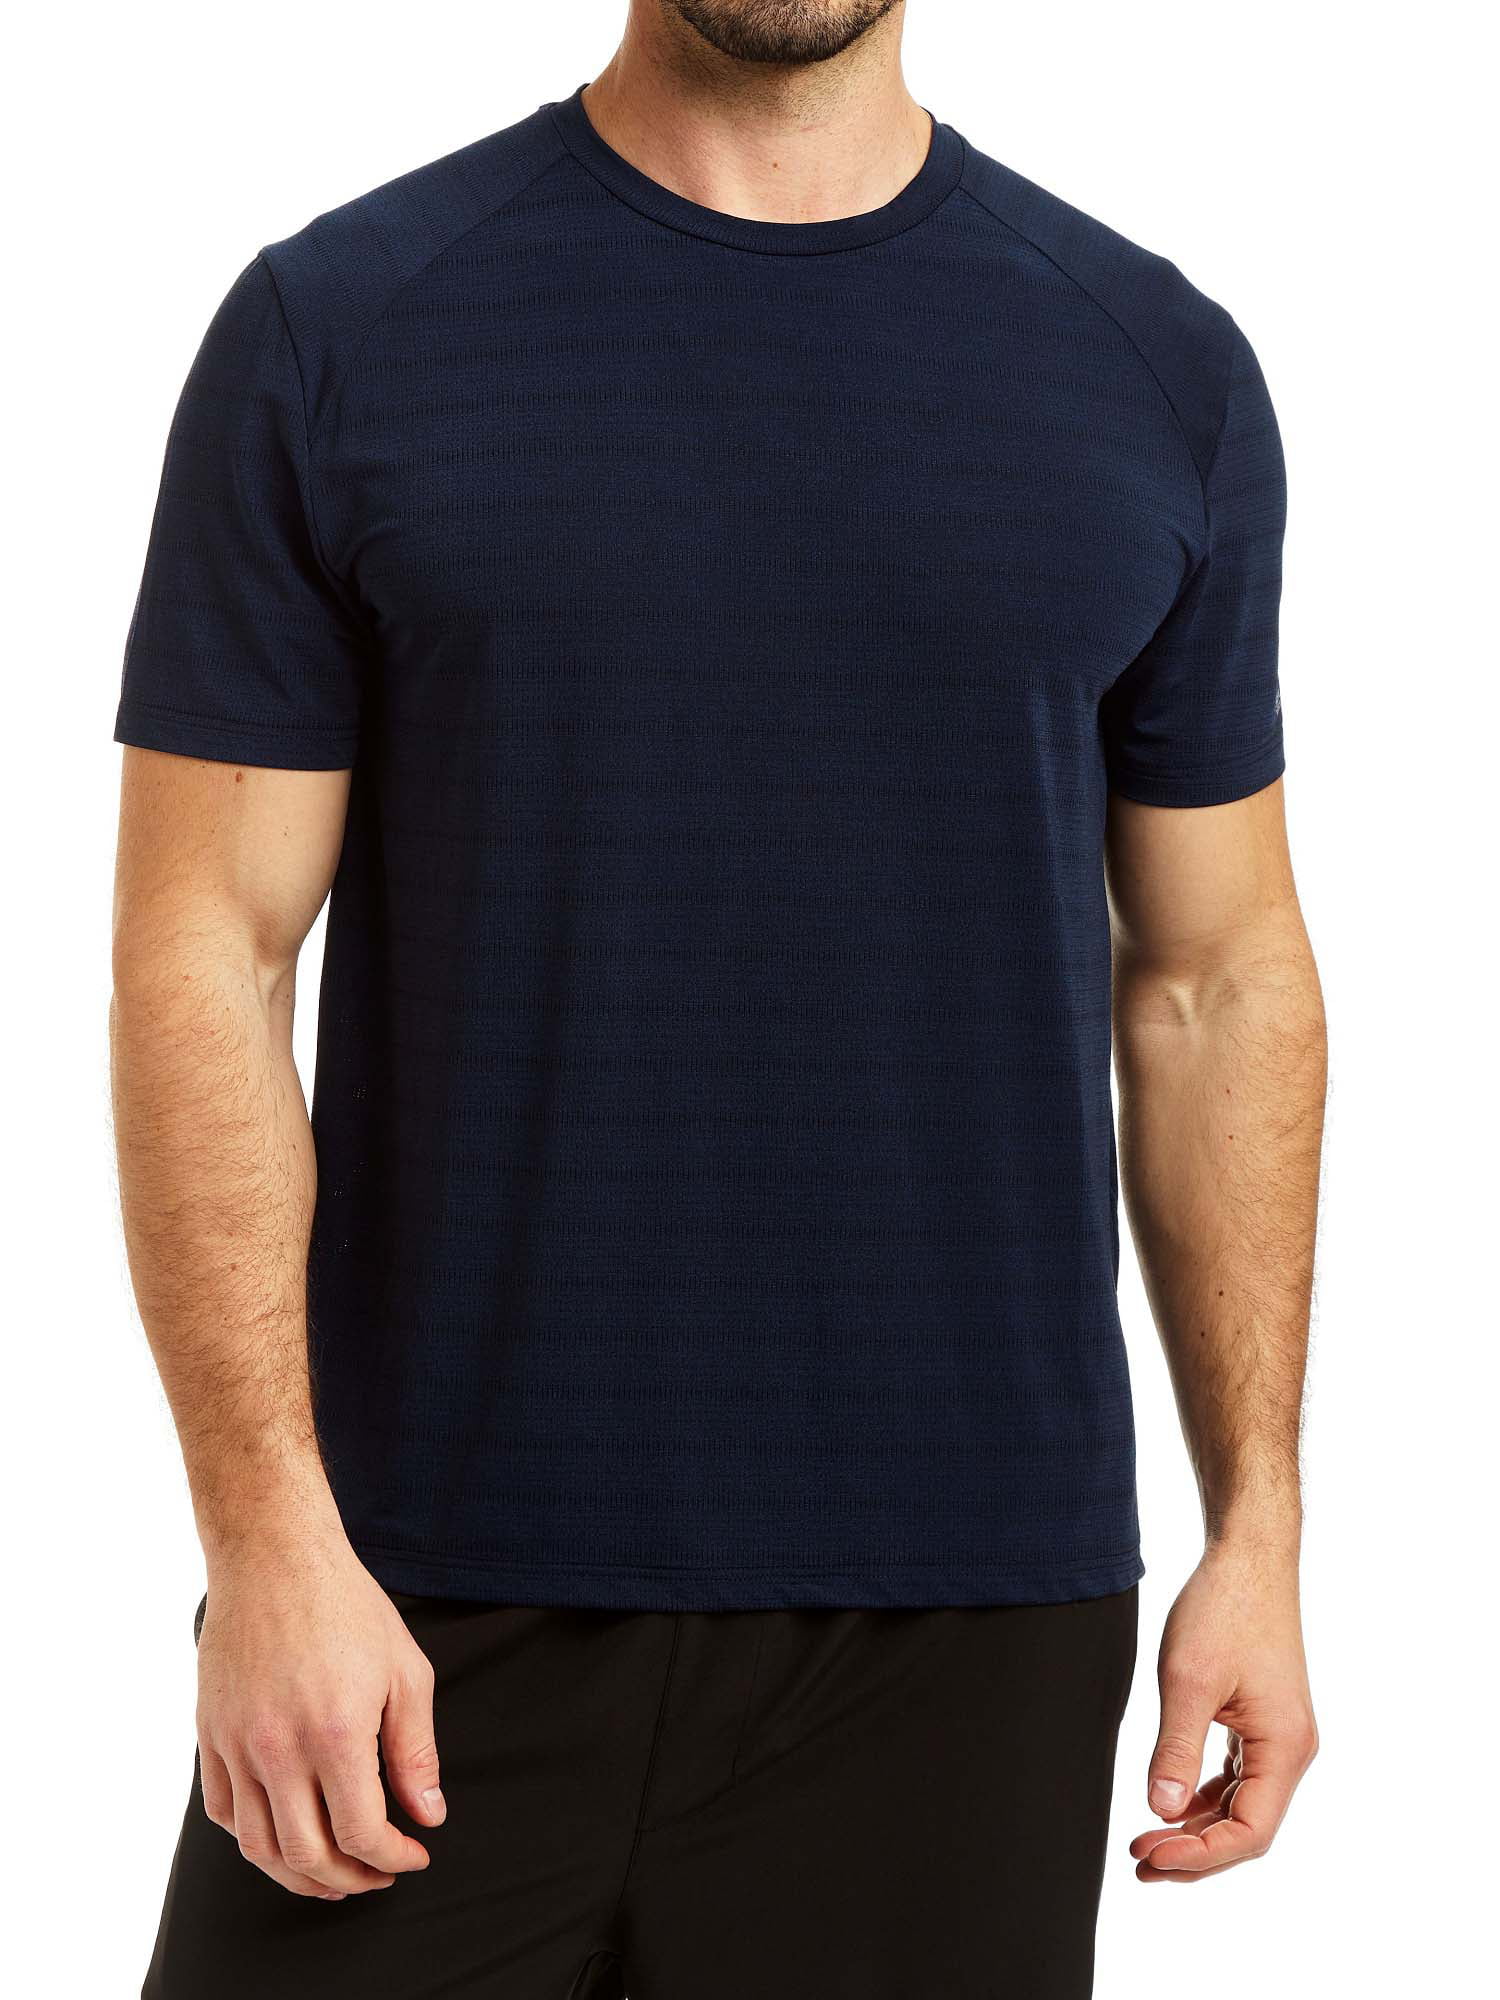 RFX by Rainforest Men's Short Sleeve Perforated Active Performance Tee ...